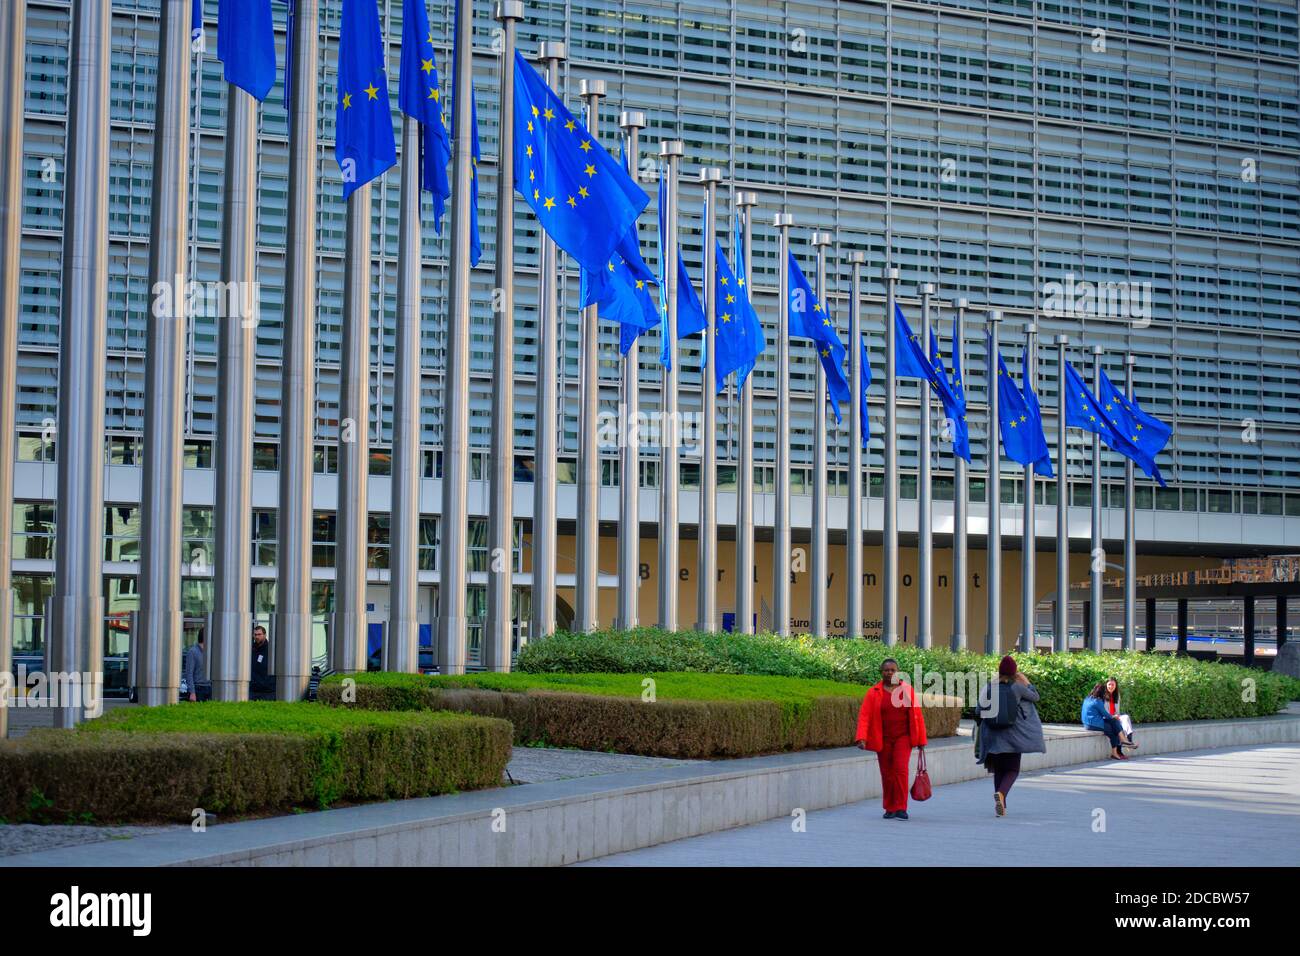 The Berlaymont Building, the headquarters of the European Commission in Brussels. Belgium. Stock Photo